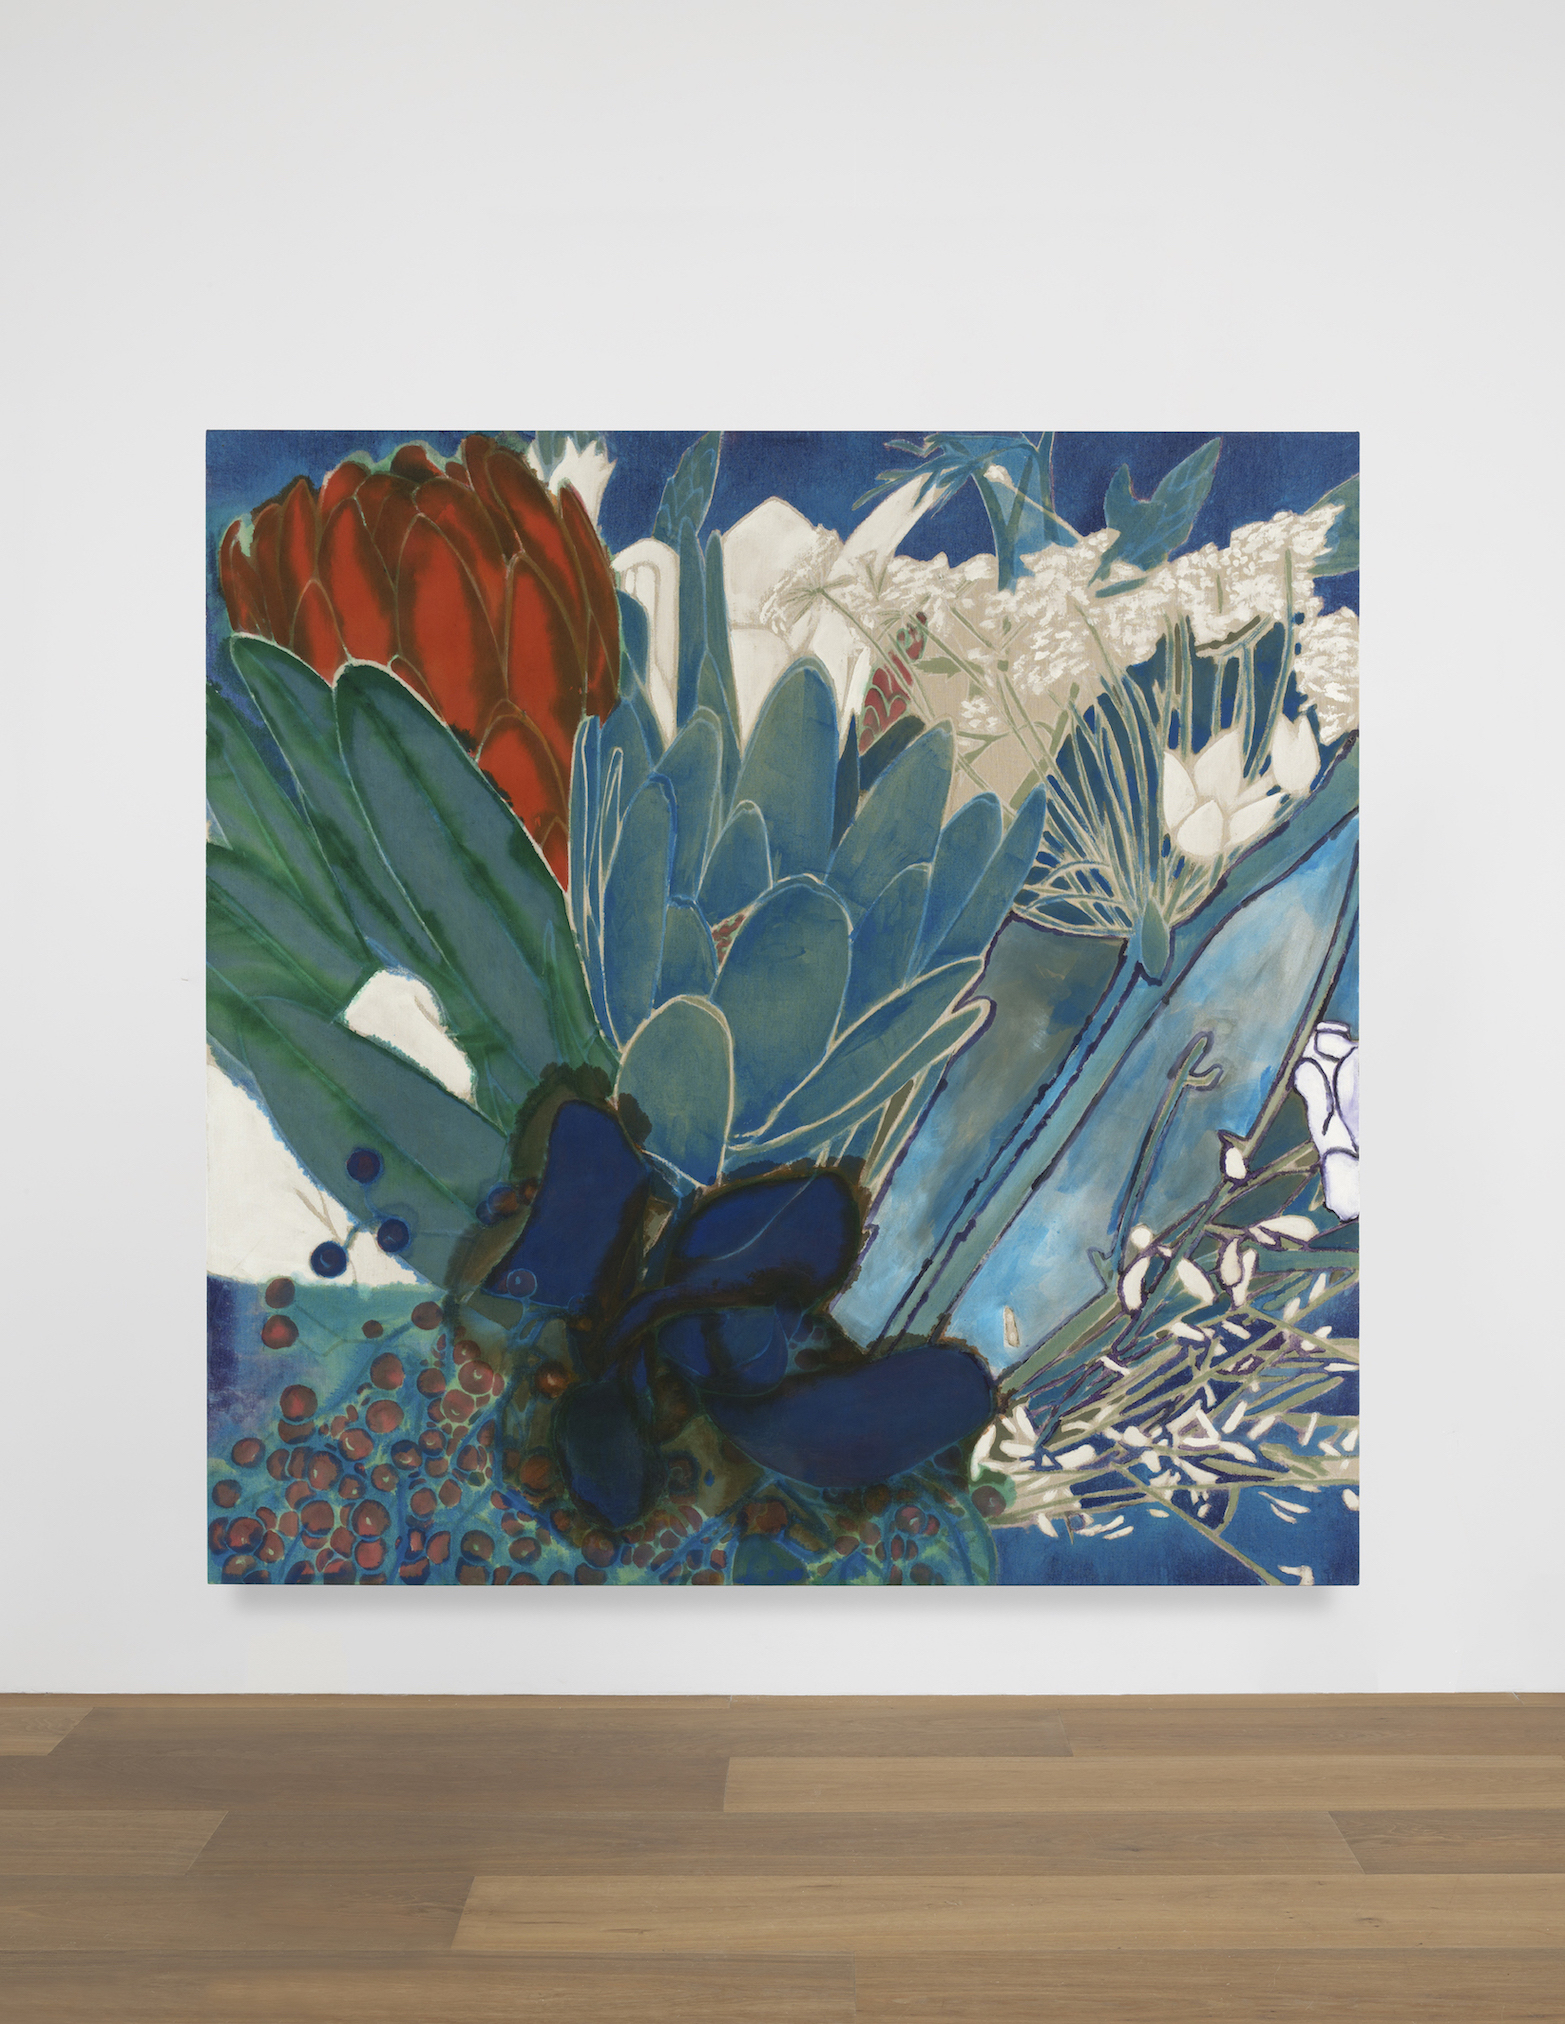 Installation view of Francisco Clemente's painting Winter Flowers XII